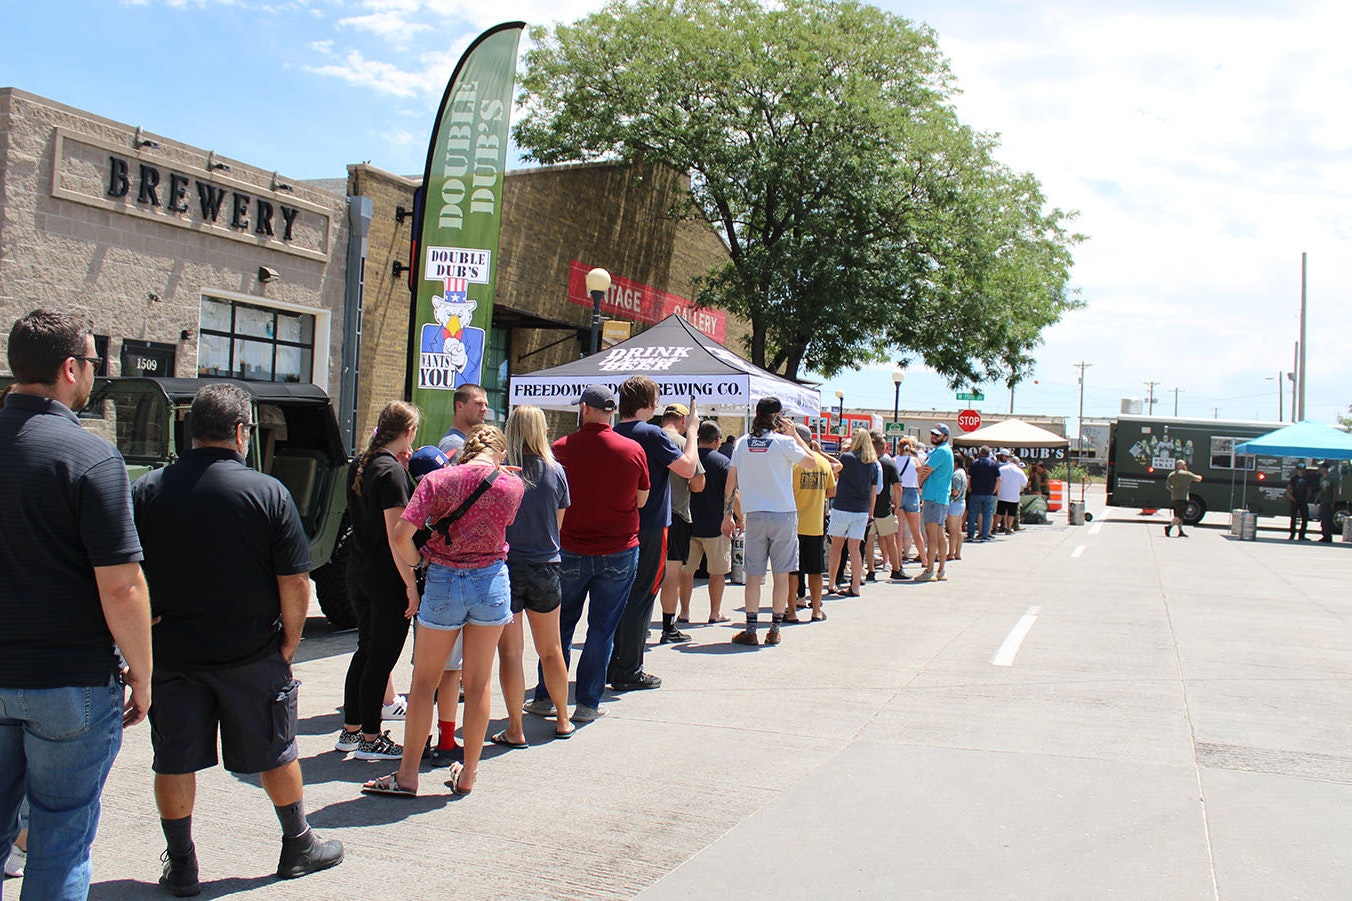 A long line of people wait for buffalo wings as Weitzel's Wings begins its world-record attempt at Freedom's Edge Brewing Co. in downtown Cheyenne on Friday afternoon.